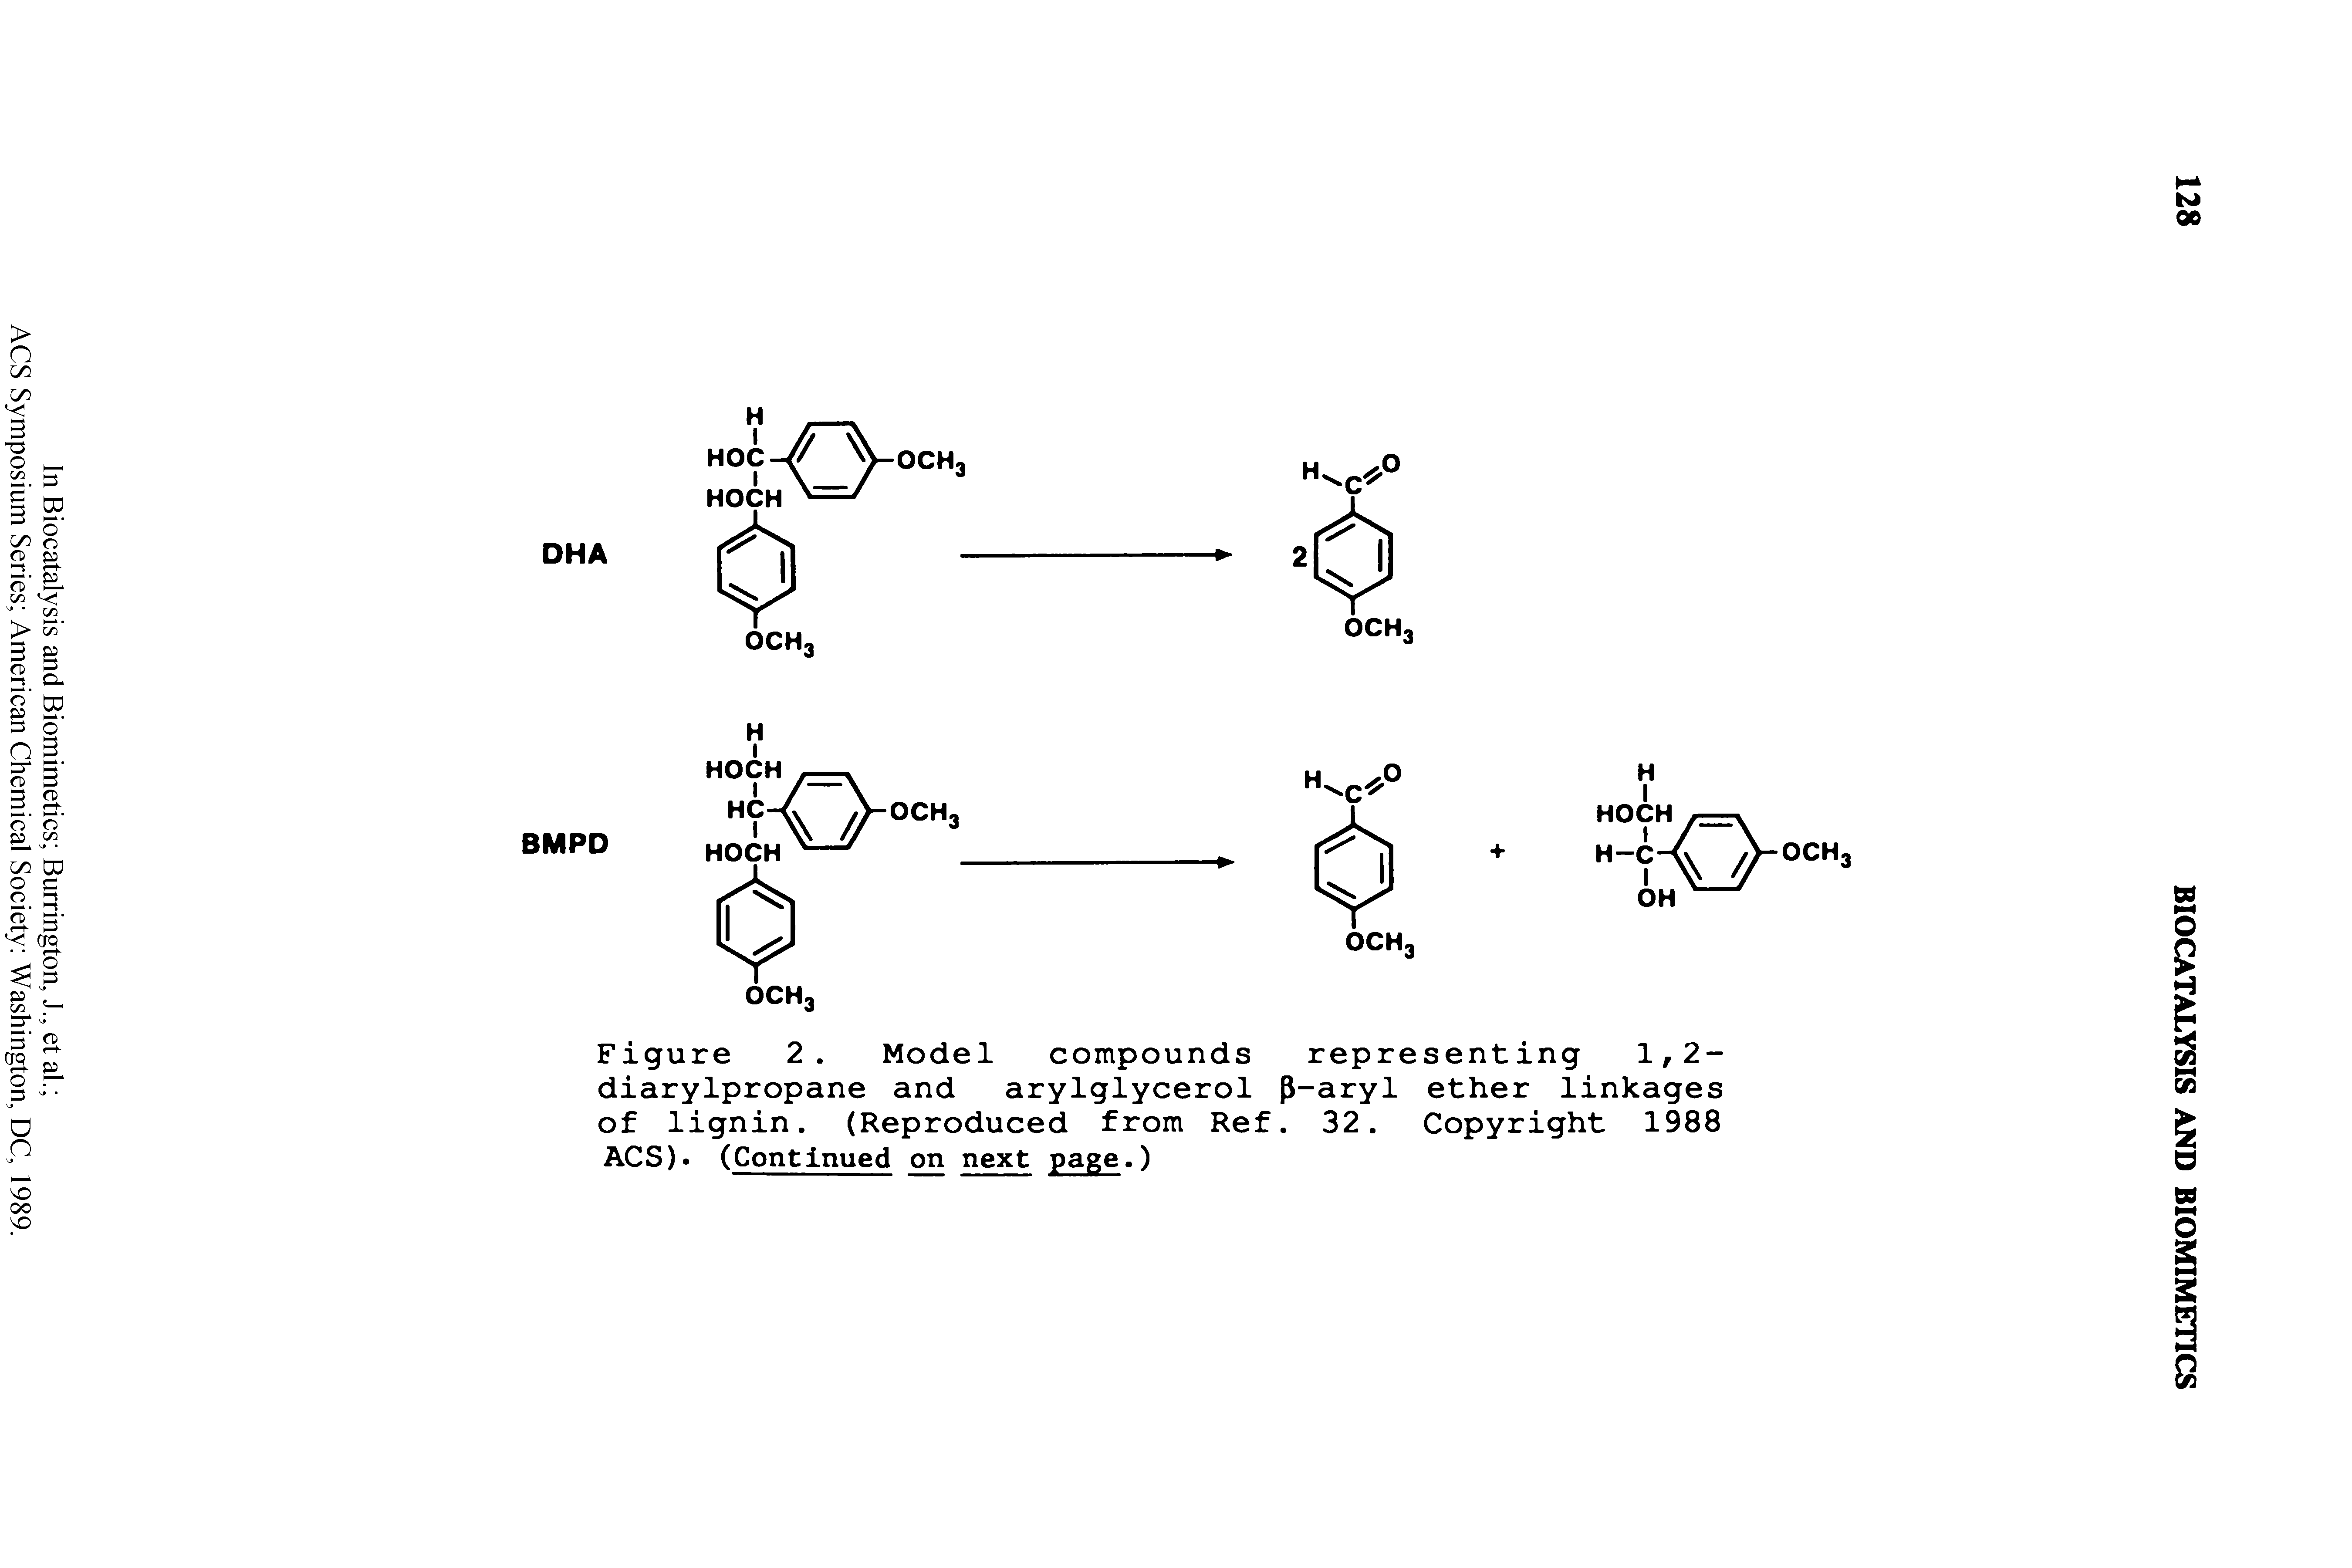 Figure 2. Model compounds representing 1,2-diarylpropane and arylglycerol [J-aryl ether linkages of lignin. (Reproduced from Ref. 32. Copyright 1988 ACS). (Continued on next page.)...